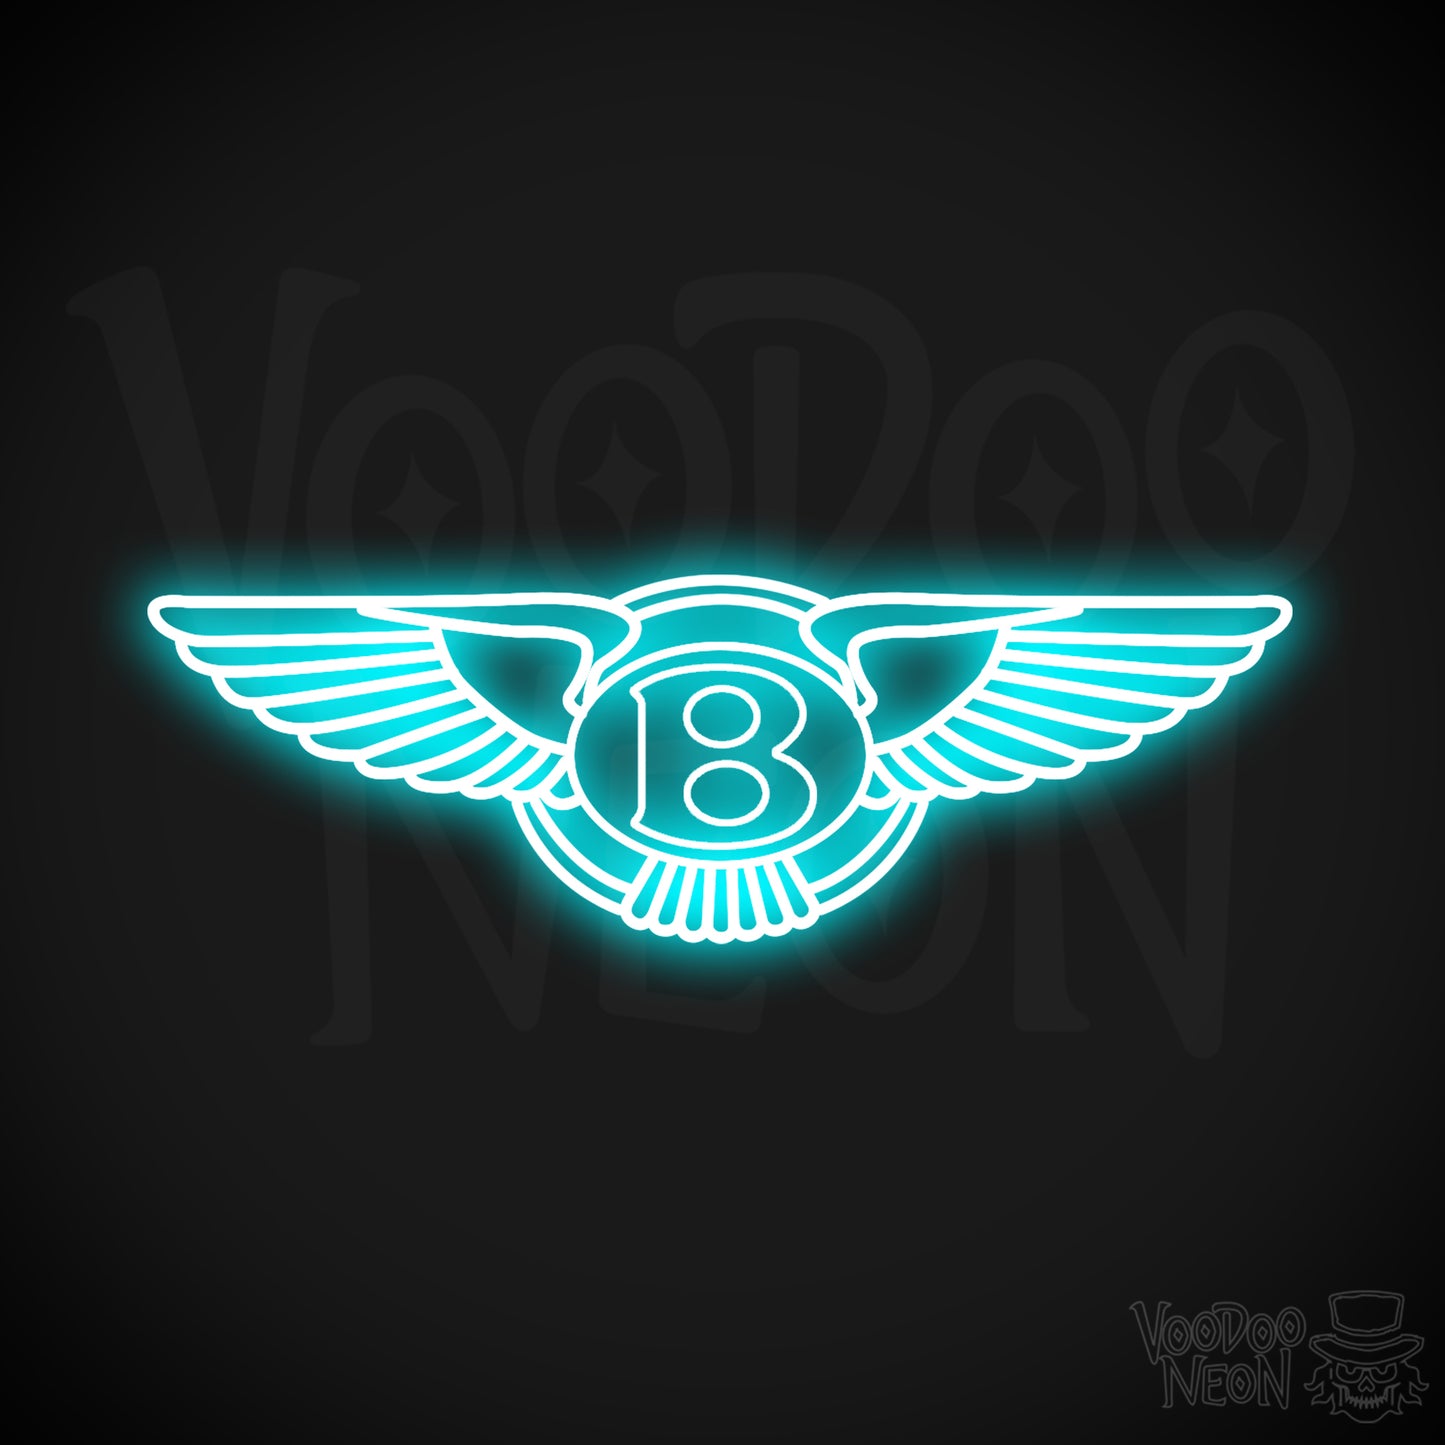 Bently Neon Sign - Bently Sign - Bently Decor - Wall Art - Color Ice Blue